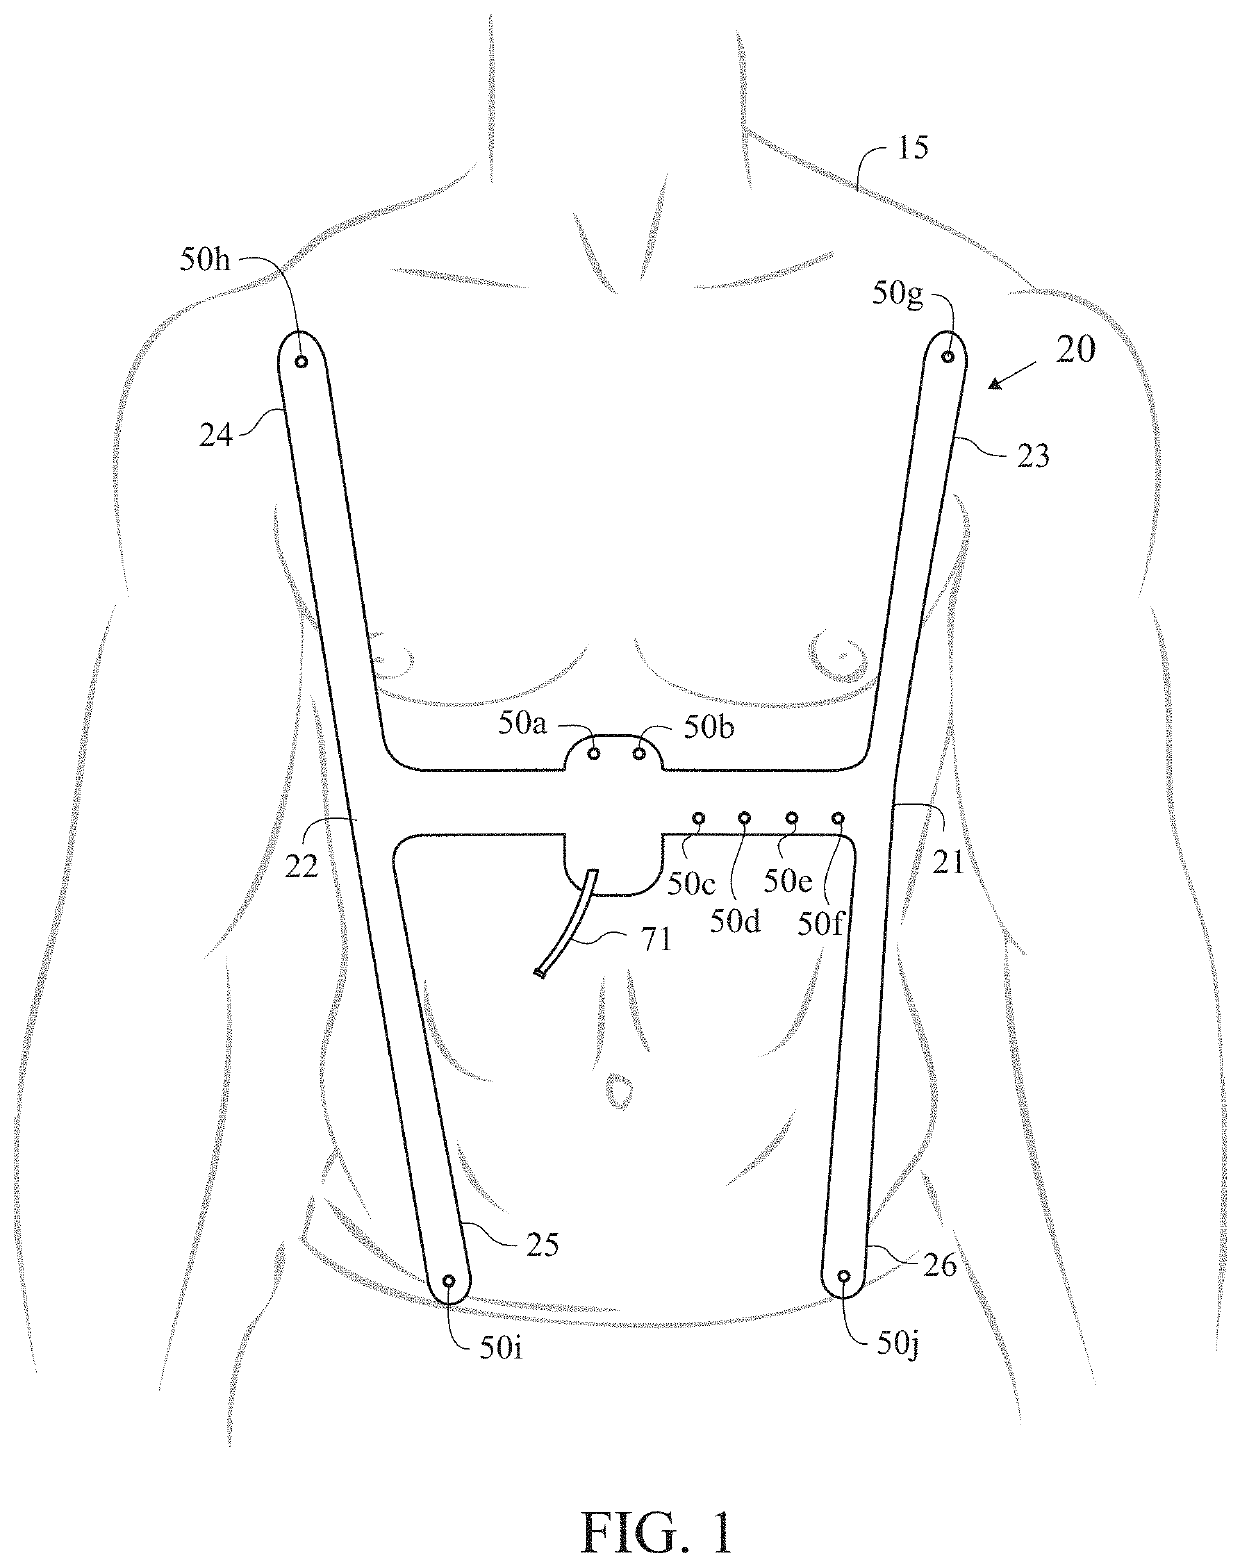 Emergency cardiac and electrocardiogram electrode placement system